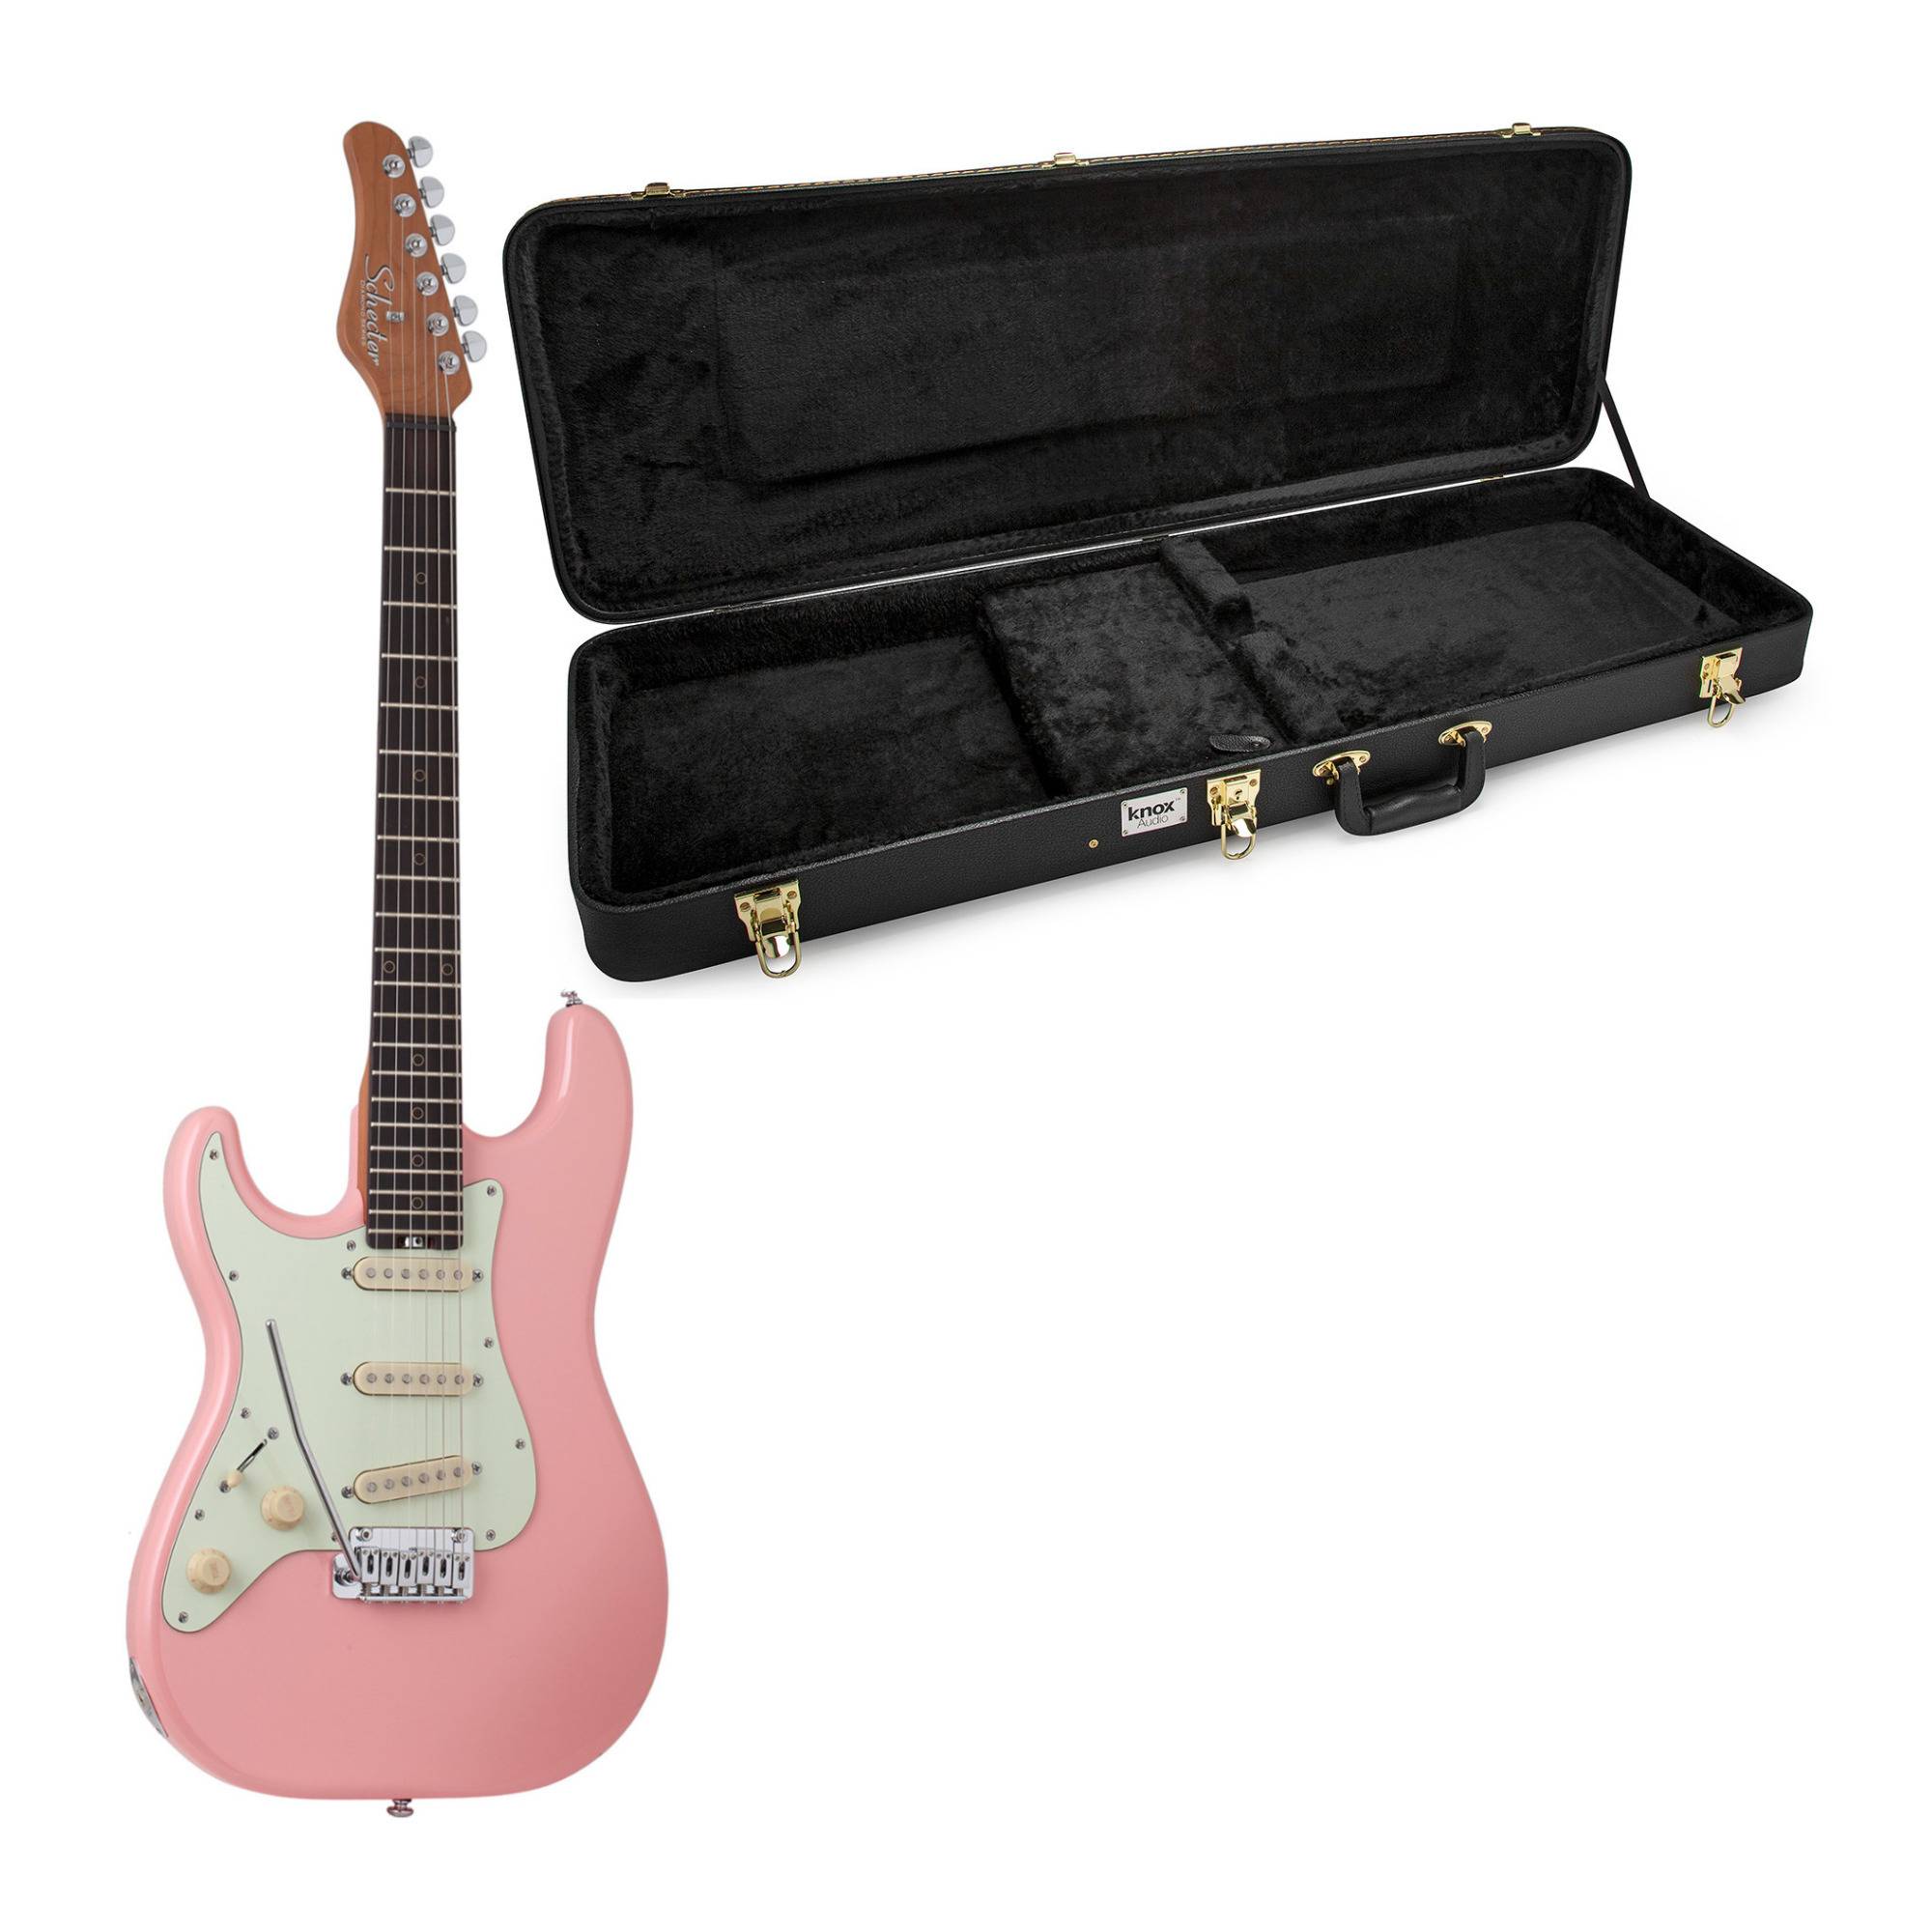 Schecter Nick Johnston Left-Hand Electric Guitar in Atomic Coral with Hard Case